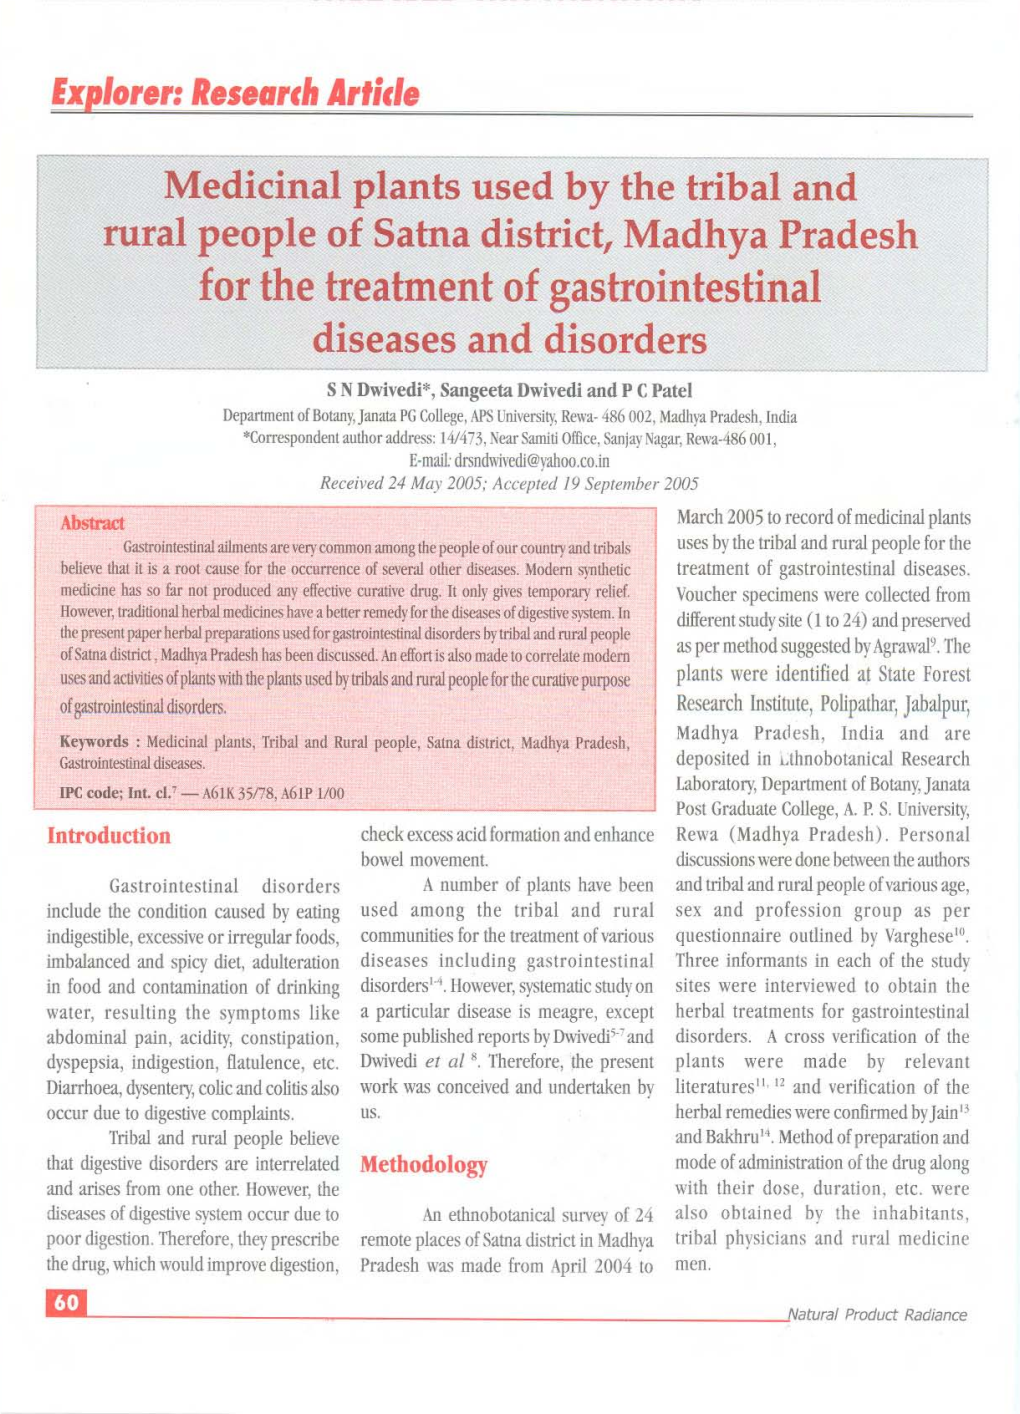 Medicinal Plants Used by the Tribal and Rural People of Satna District, Madhya Pradesh for the Treatment of Gastrointestinal Diseases and Disorders